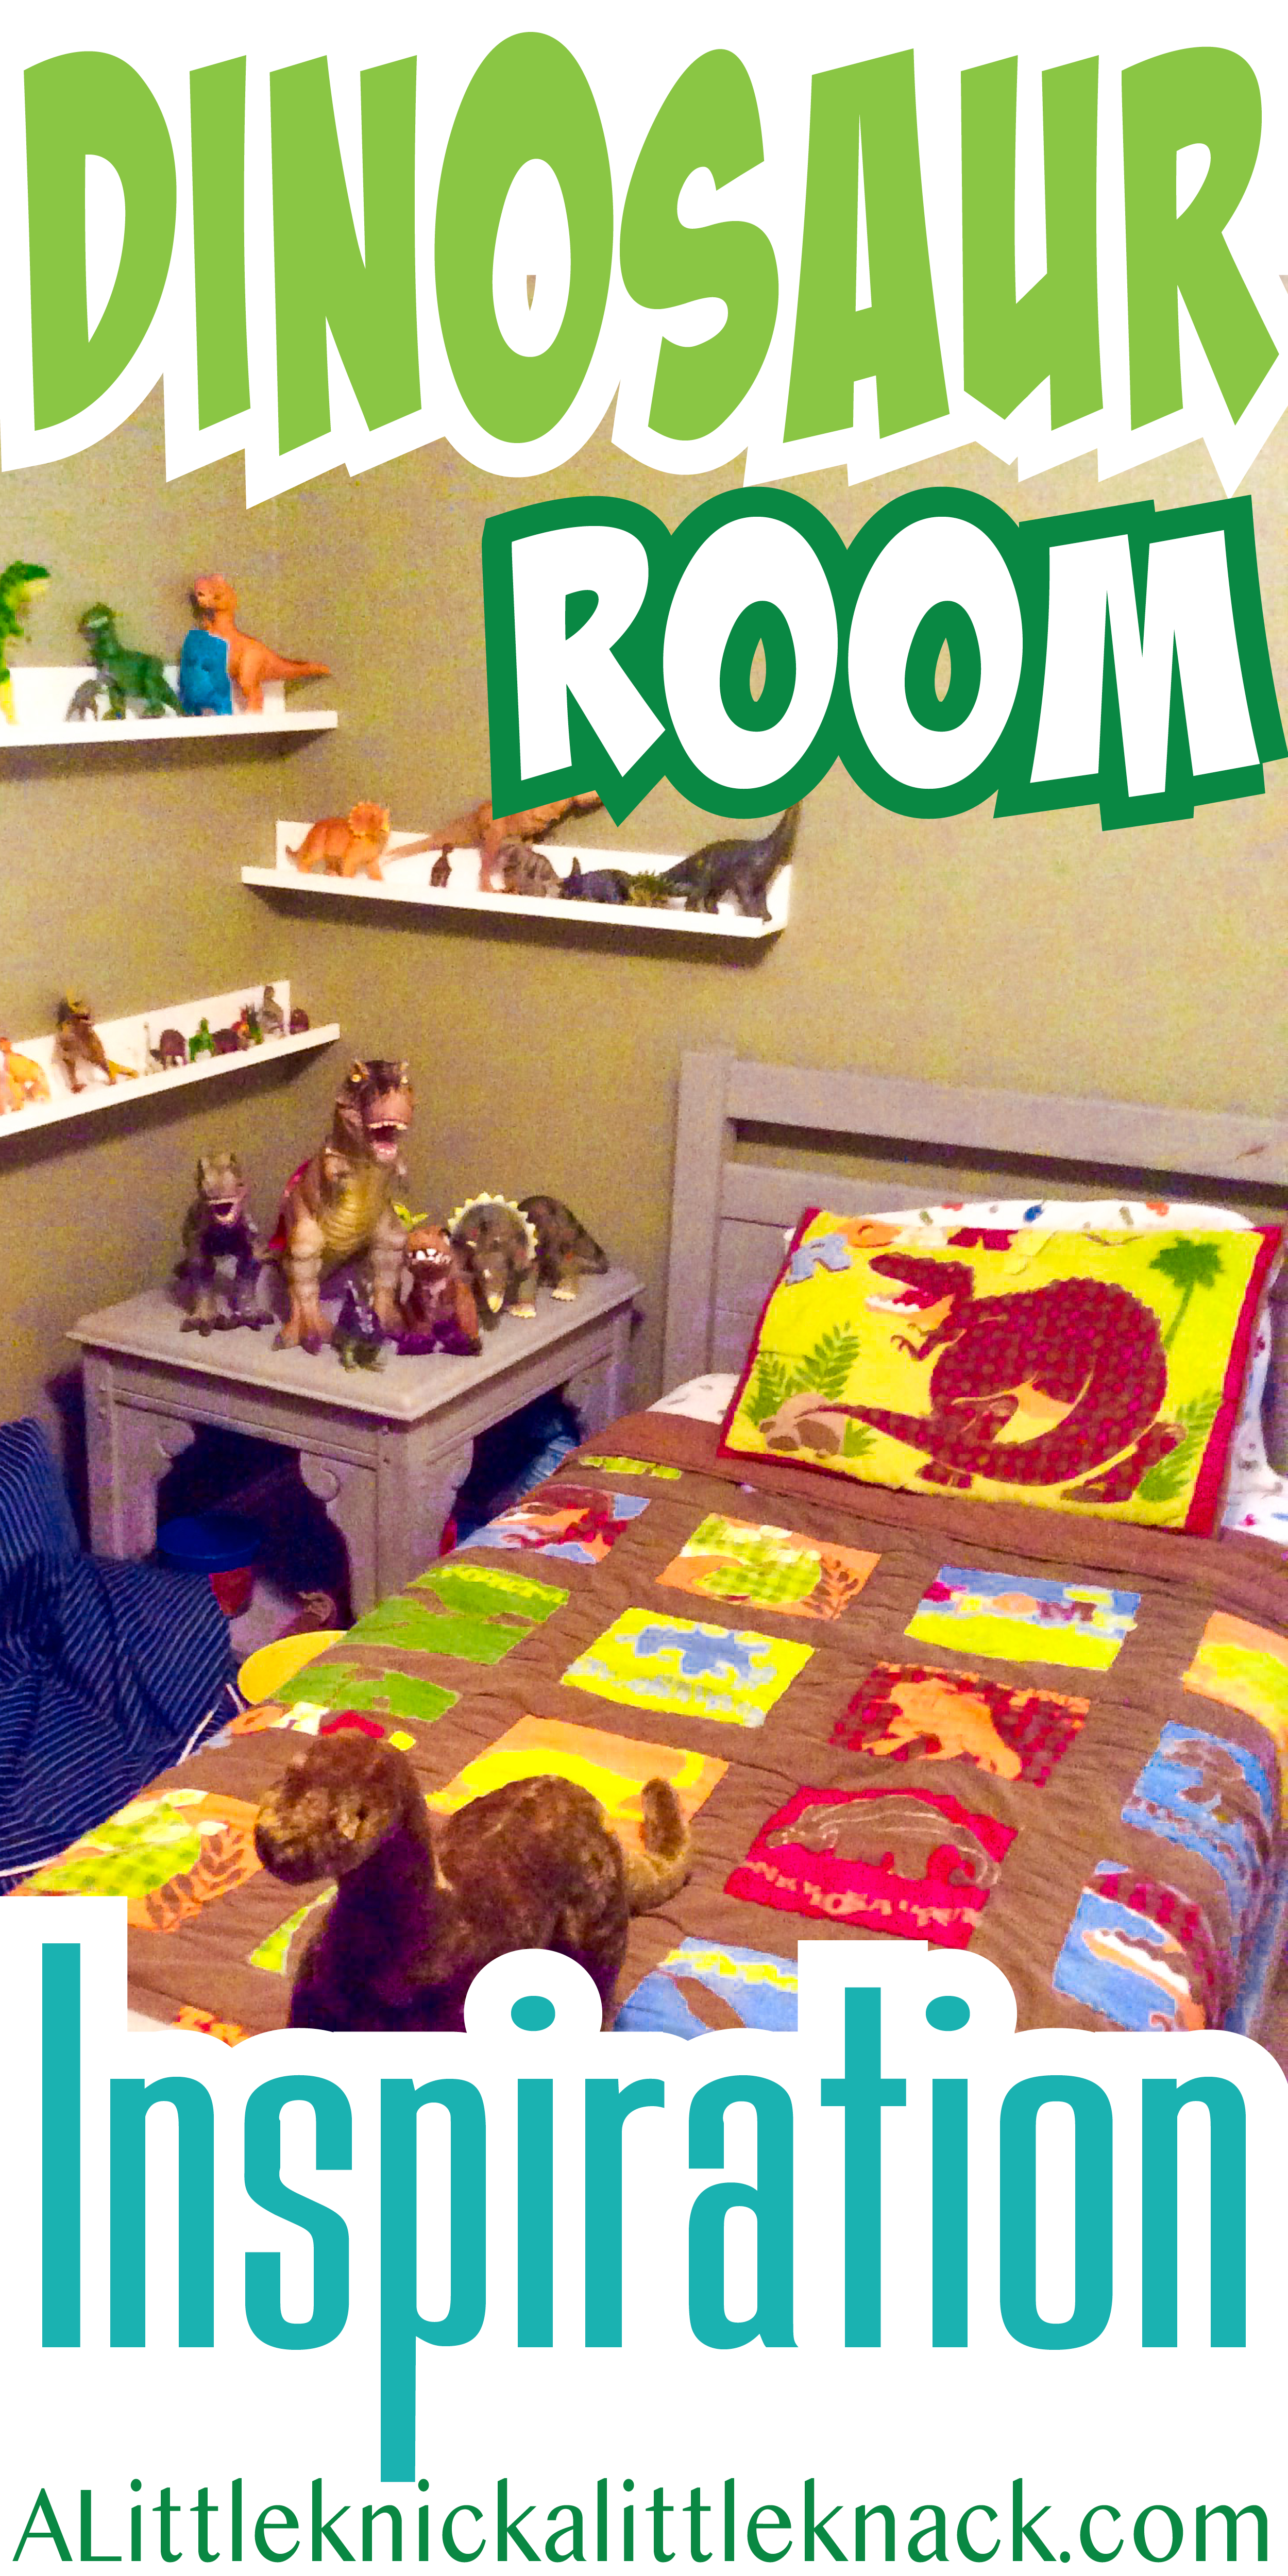 A colorful dinosaur quilt and a collection of dinosaur figurines with a text overlay